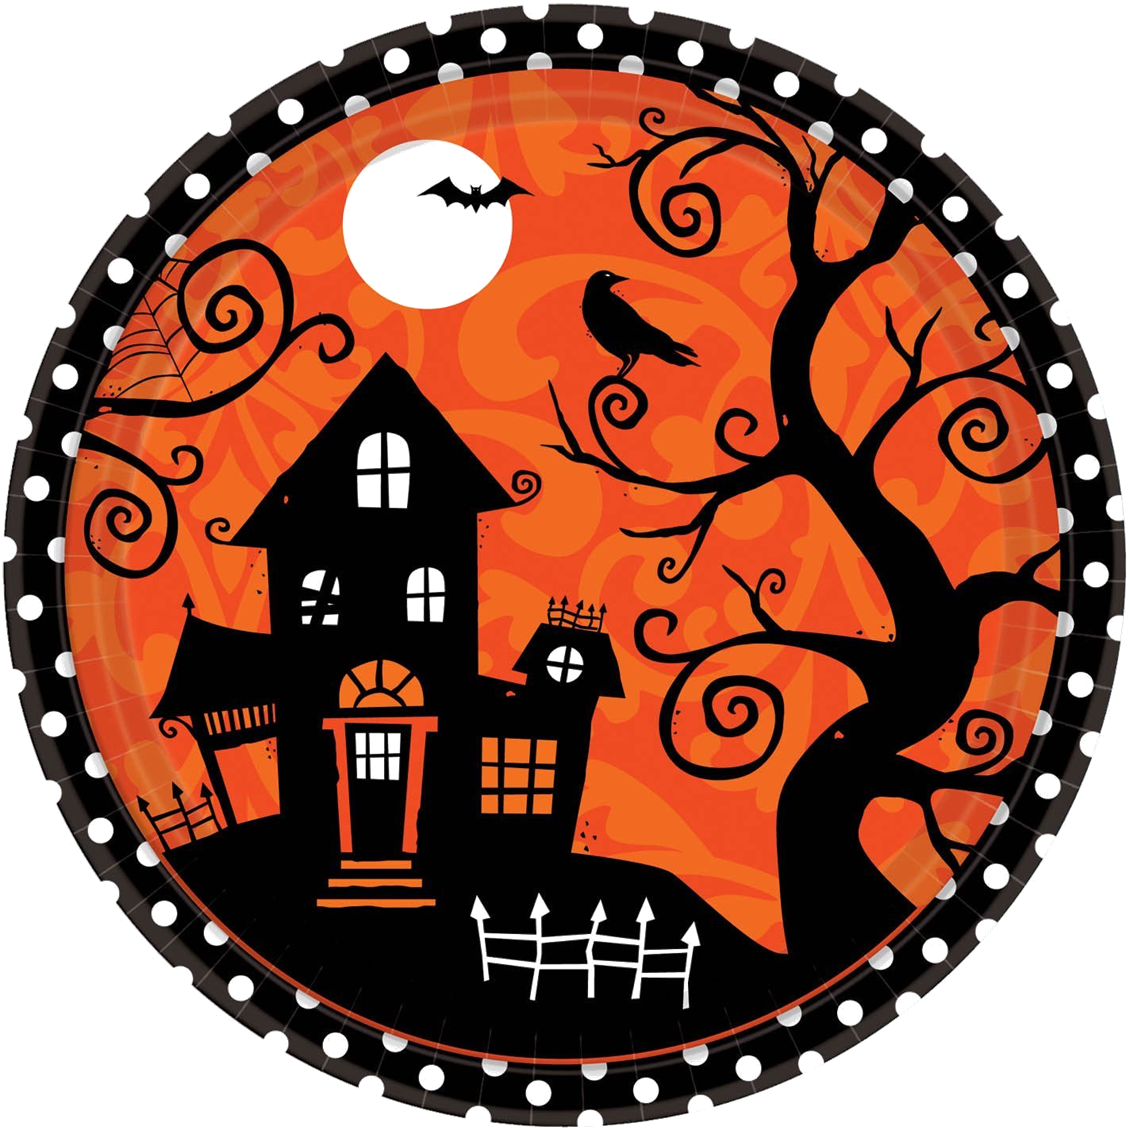 About This Event - Ceramic Halloween Plate (1130x1130)